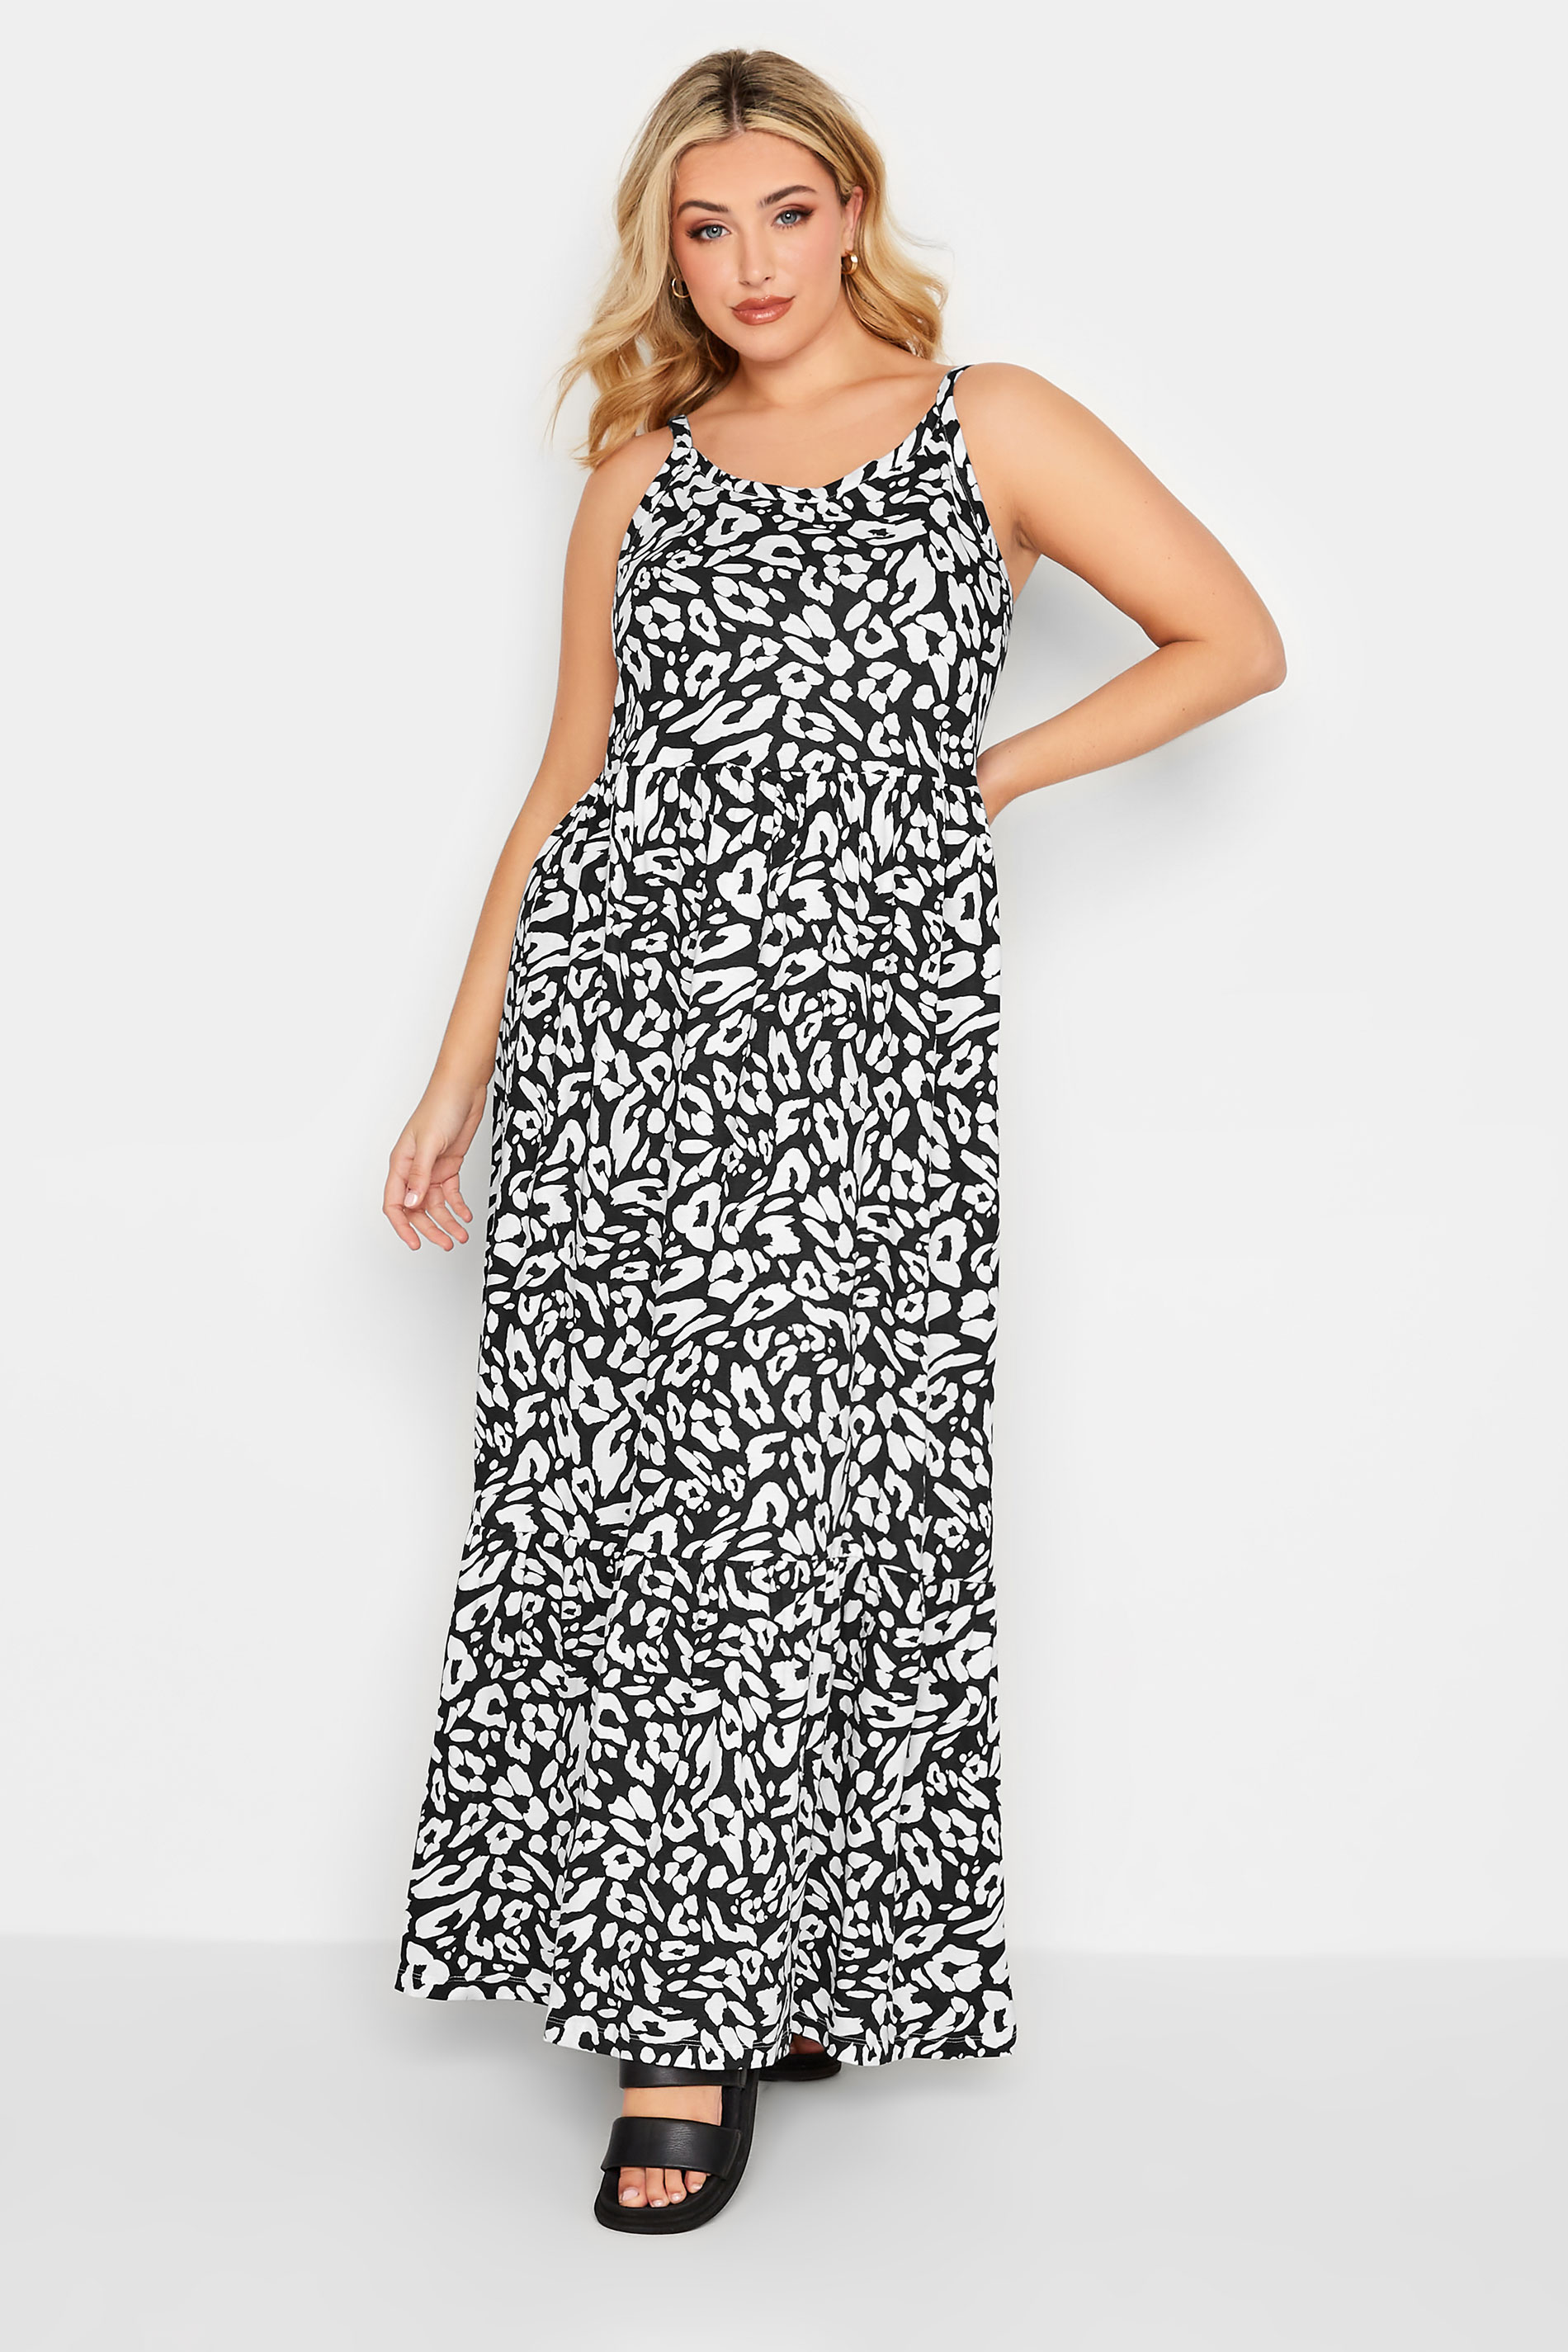 YOURS Curve Plus Size Black Leopard Print Tiered Maxi Sundress | Yours Clothing  1